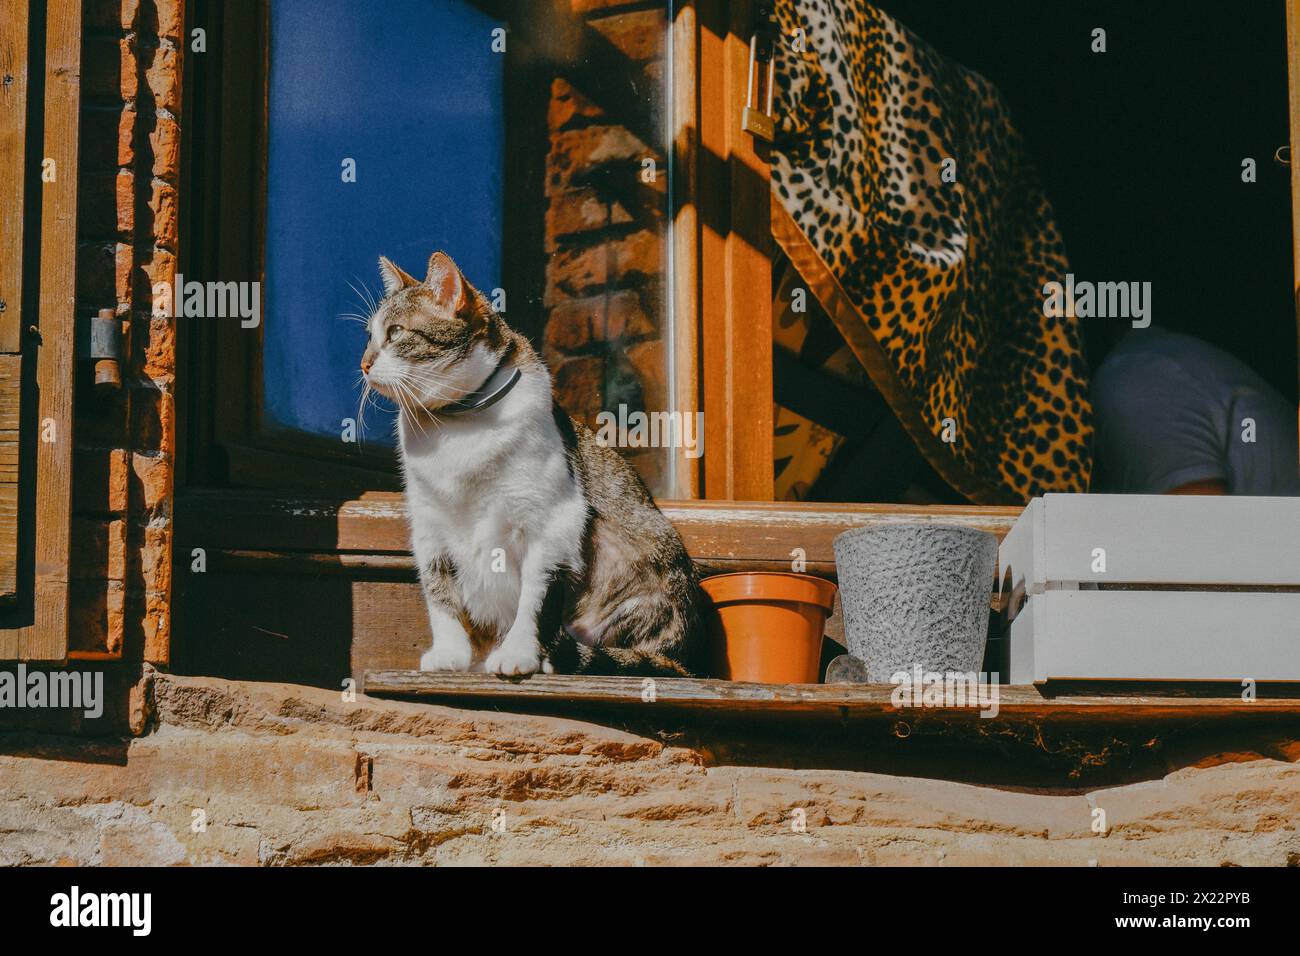 A cute cat perched on a ledge, looking curious and relaxed Stock Photo